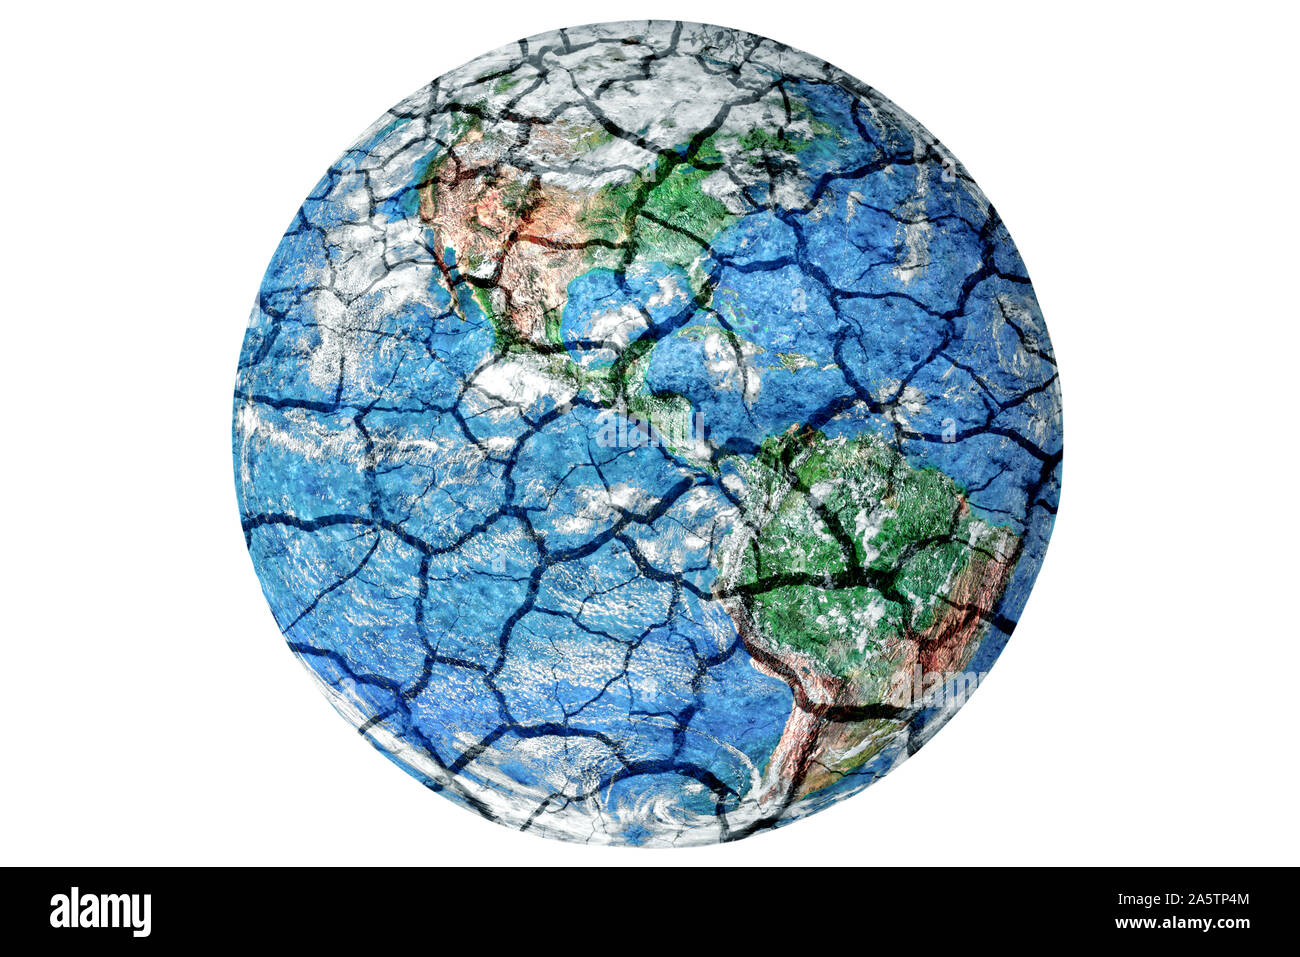 Earth with dry and cracked texture.Global warming conceptual picture. Ecological disaster conceptual picture. Stock Photo